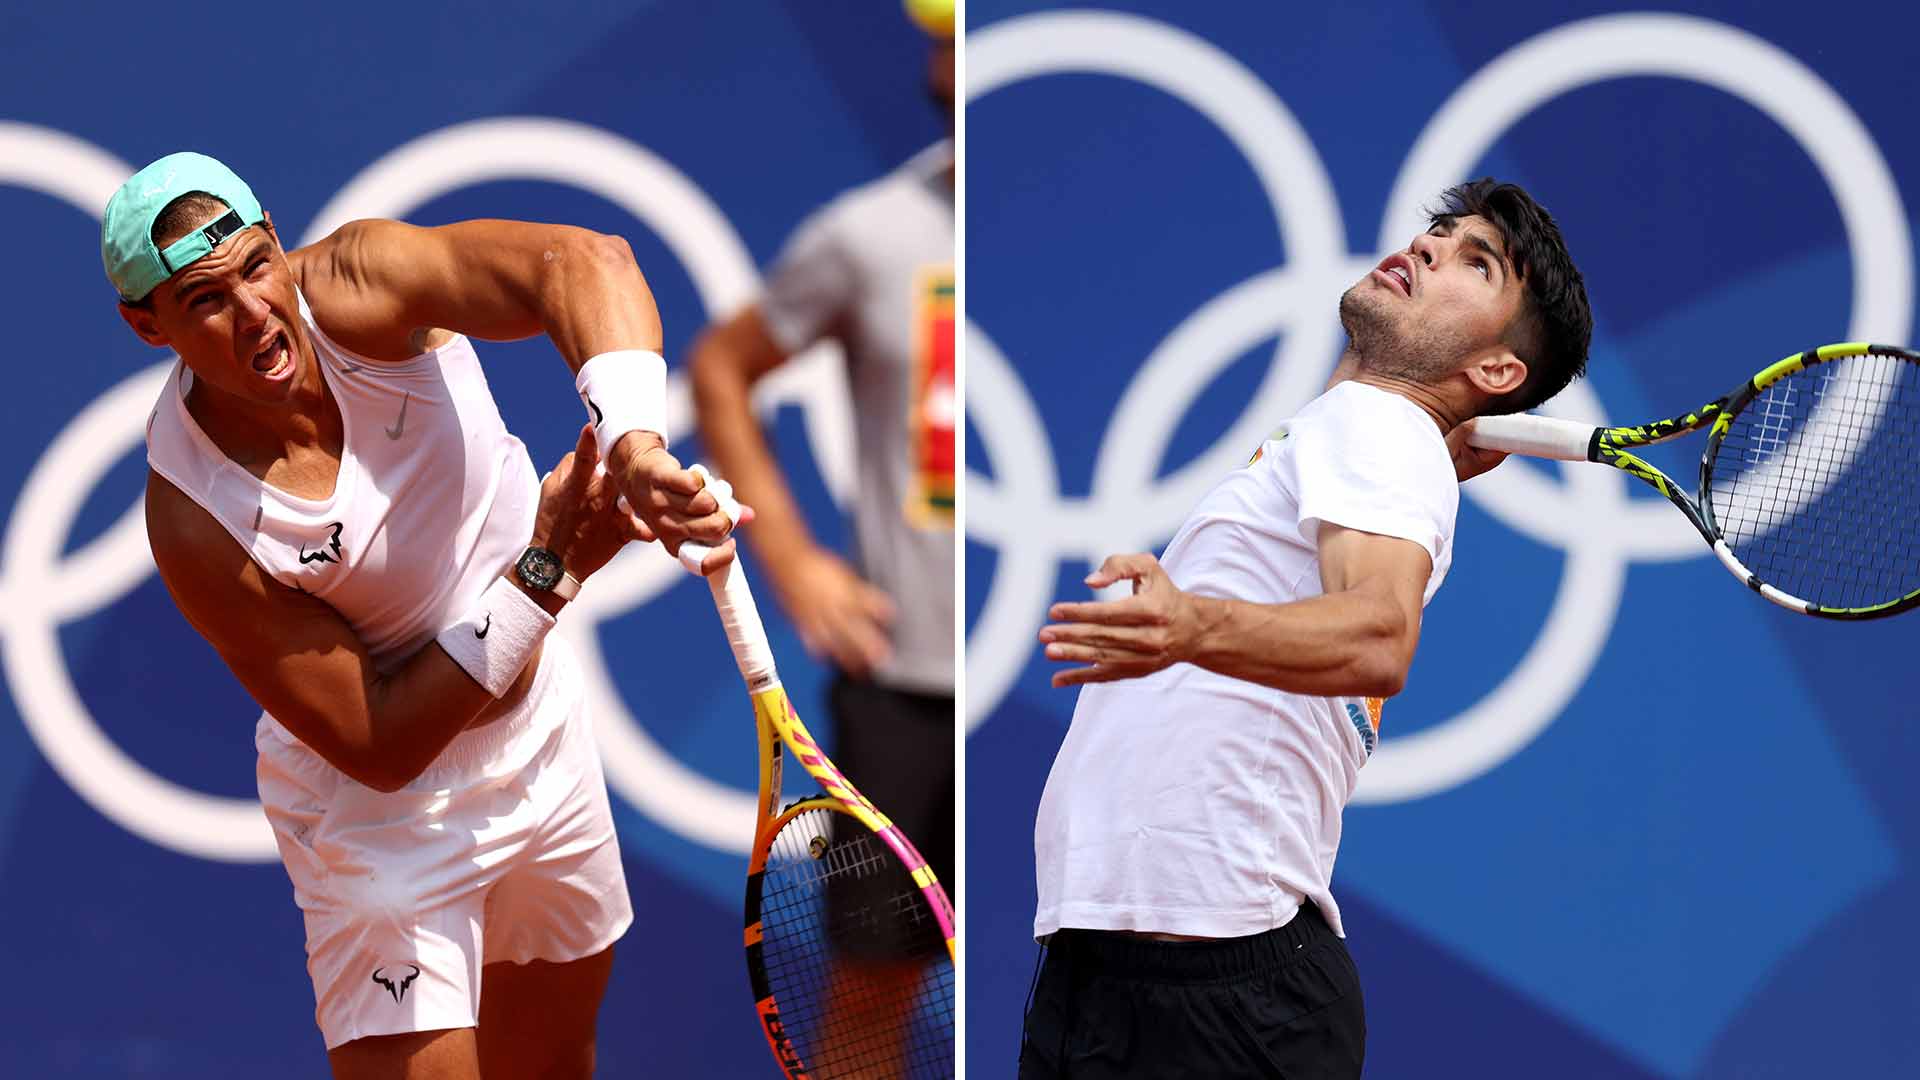 Rafael Nadal and Carlos Alcaraz will compete in both singles and doubles at the Olympics.